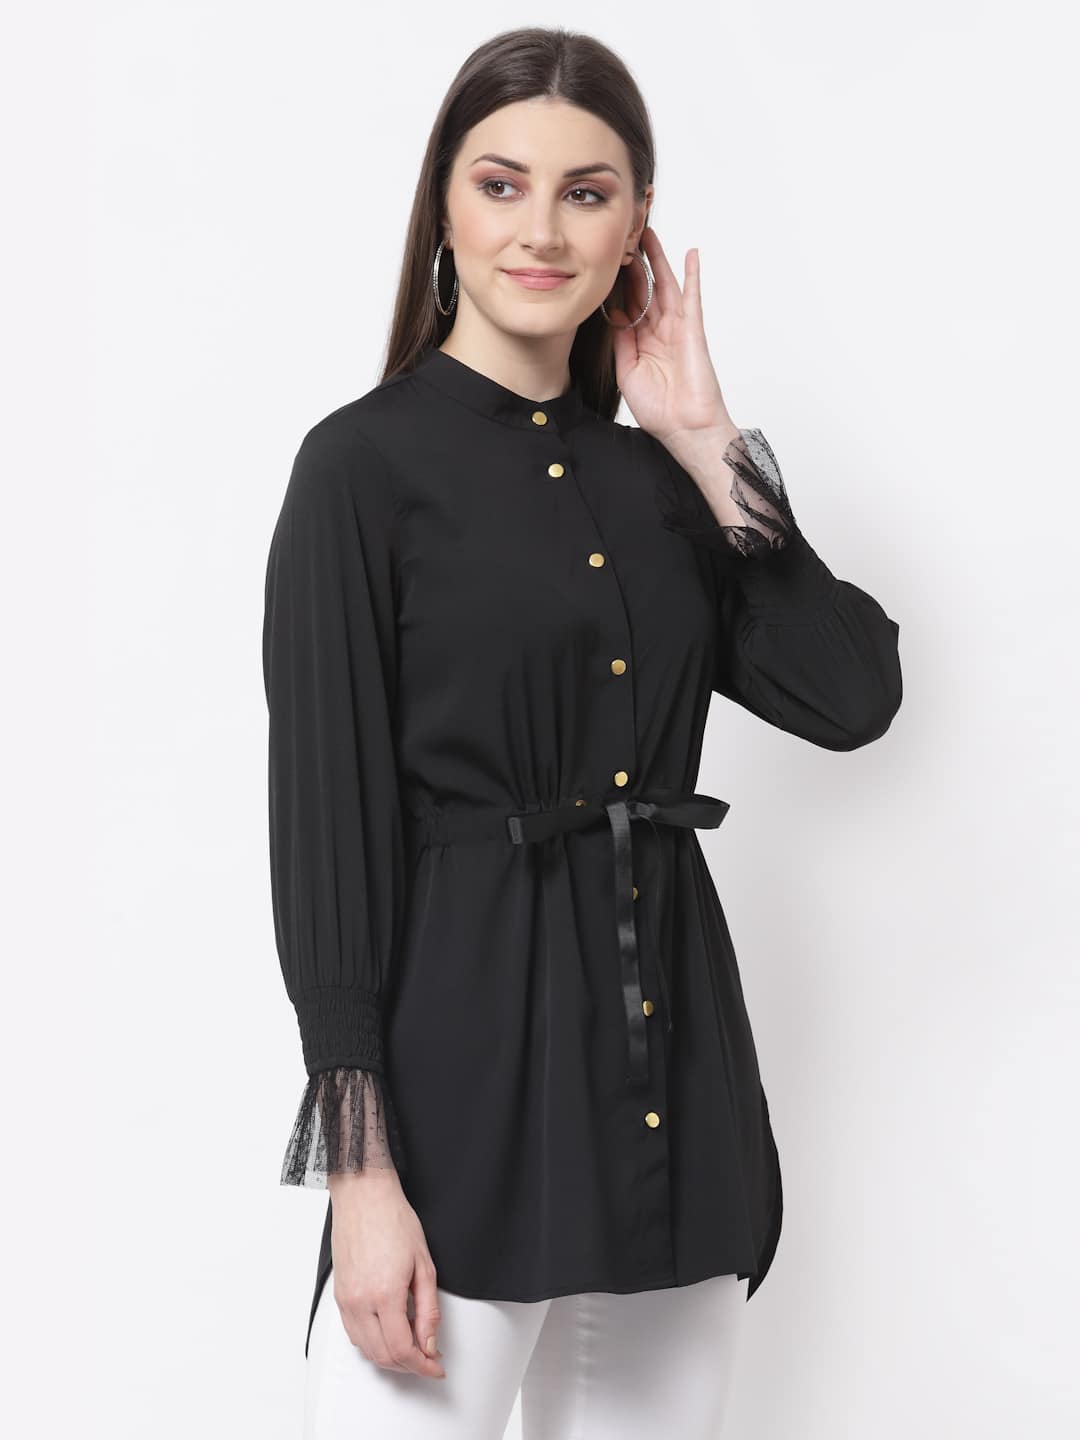 Black With Gold Button Tunic